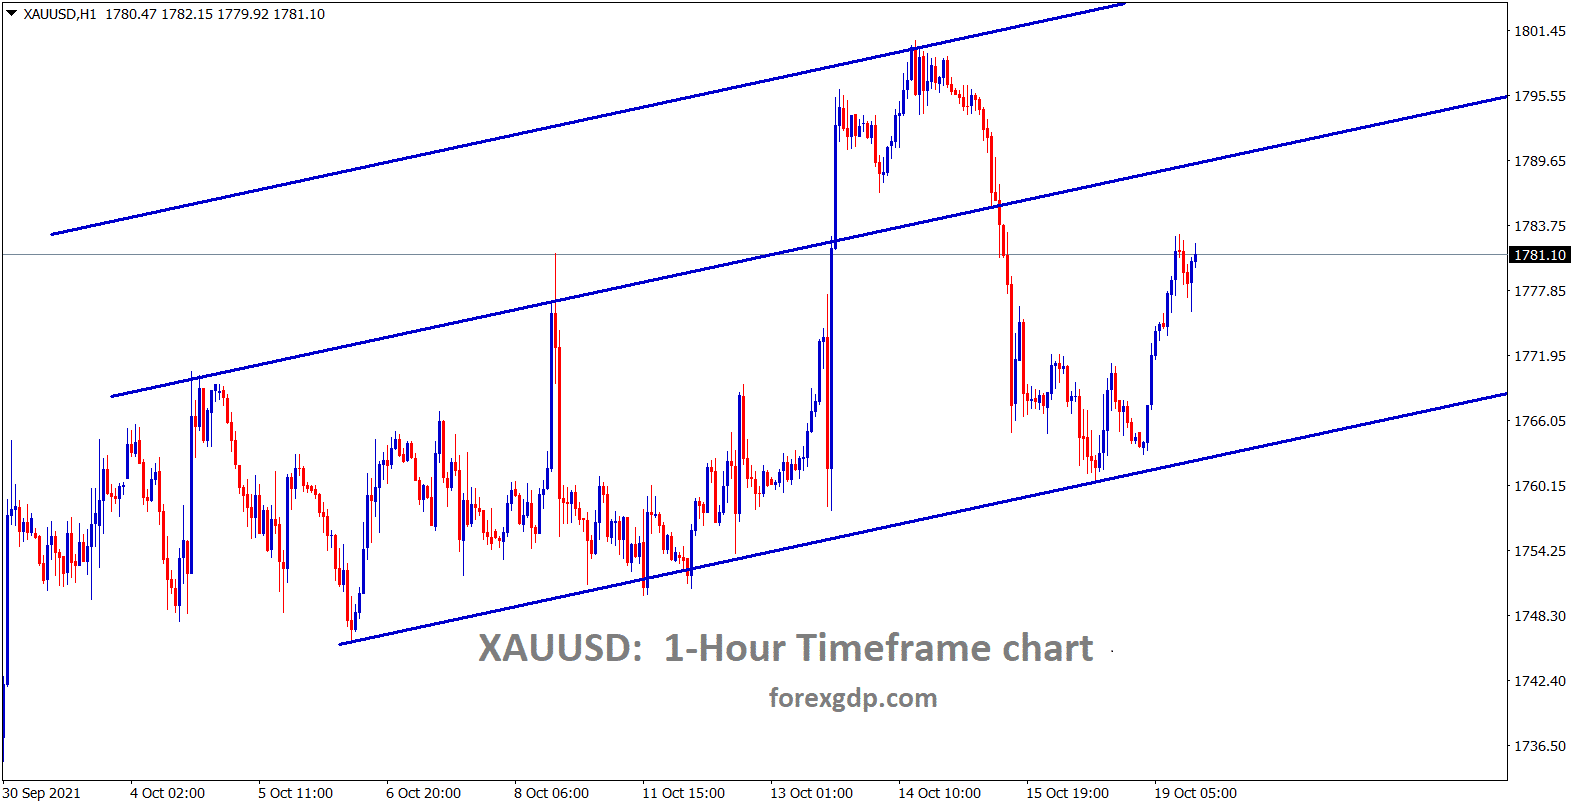 Gold XAUUSD is moving in an ascending channel range in the hourly chart